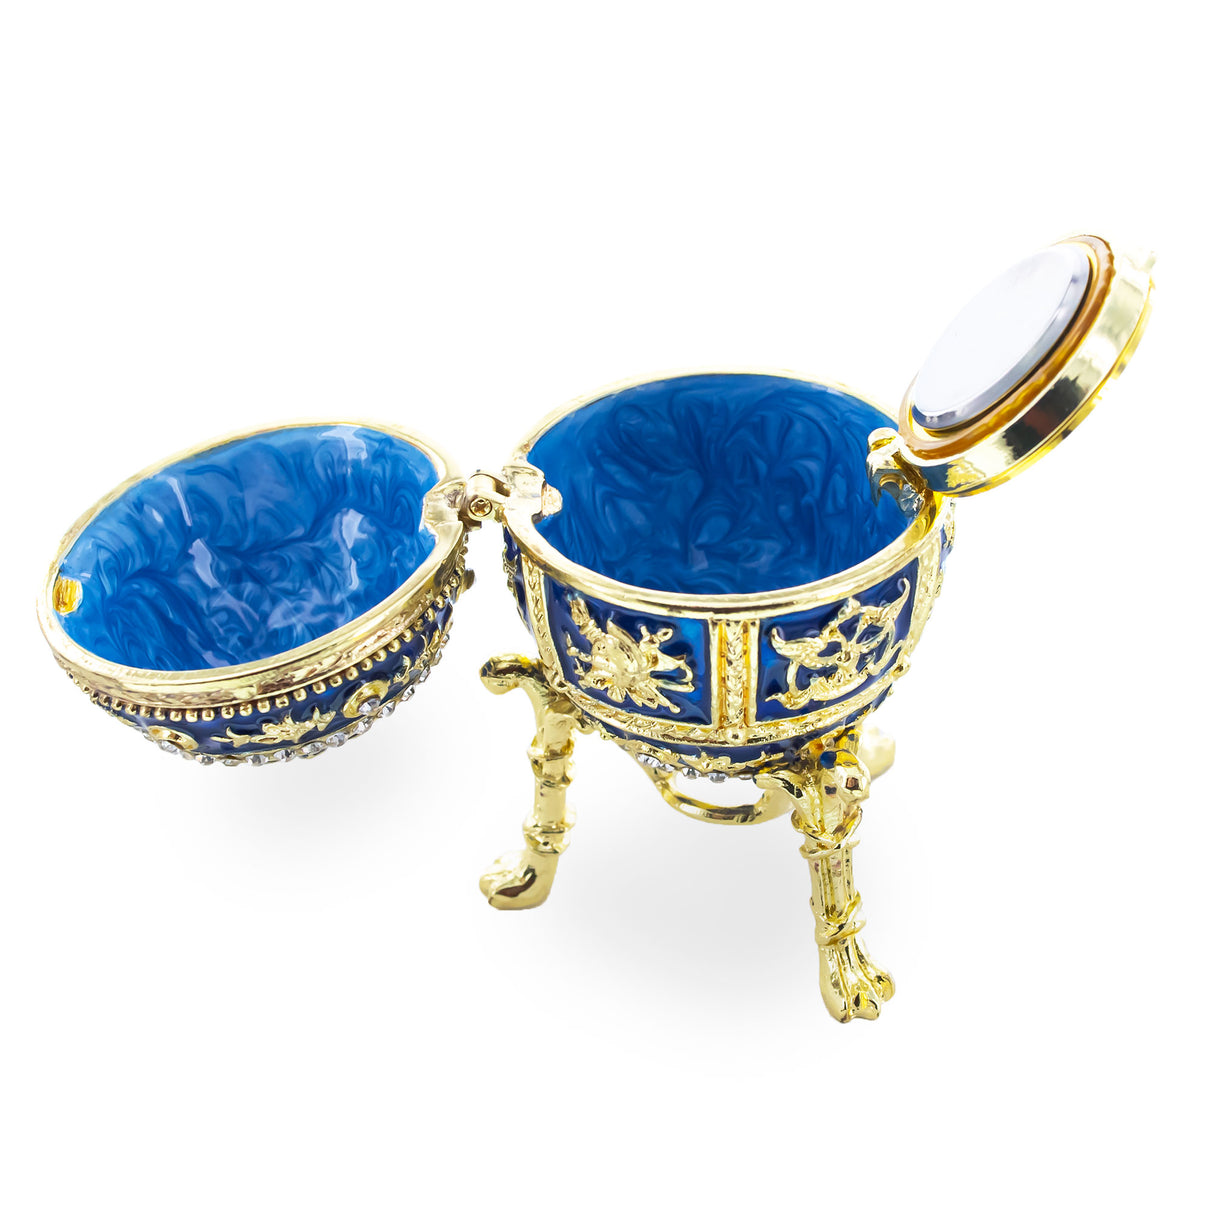 Blue Enamel Royal Inspired Imperial Easter Egg with Clock Surprise ,dimensions in inches: 2.8 x 1.59 x 1.7